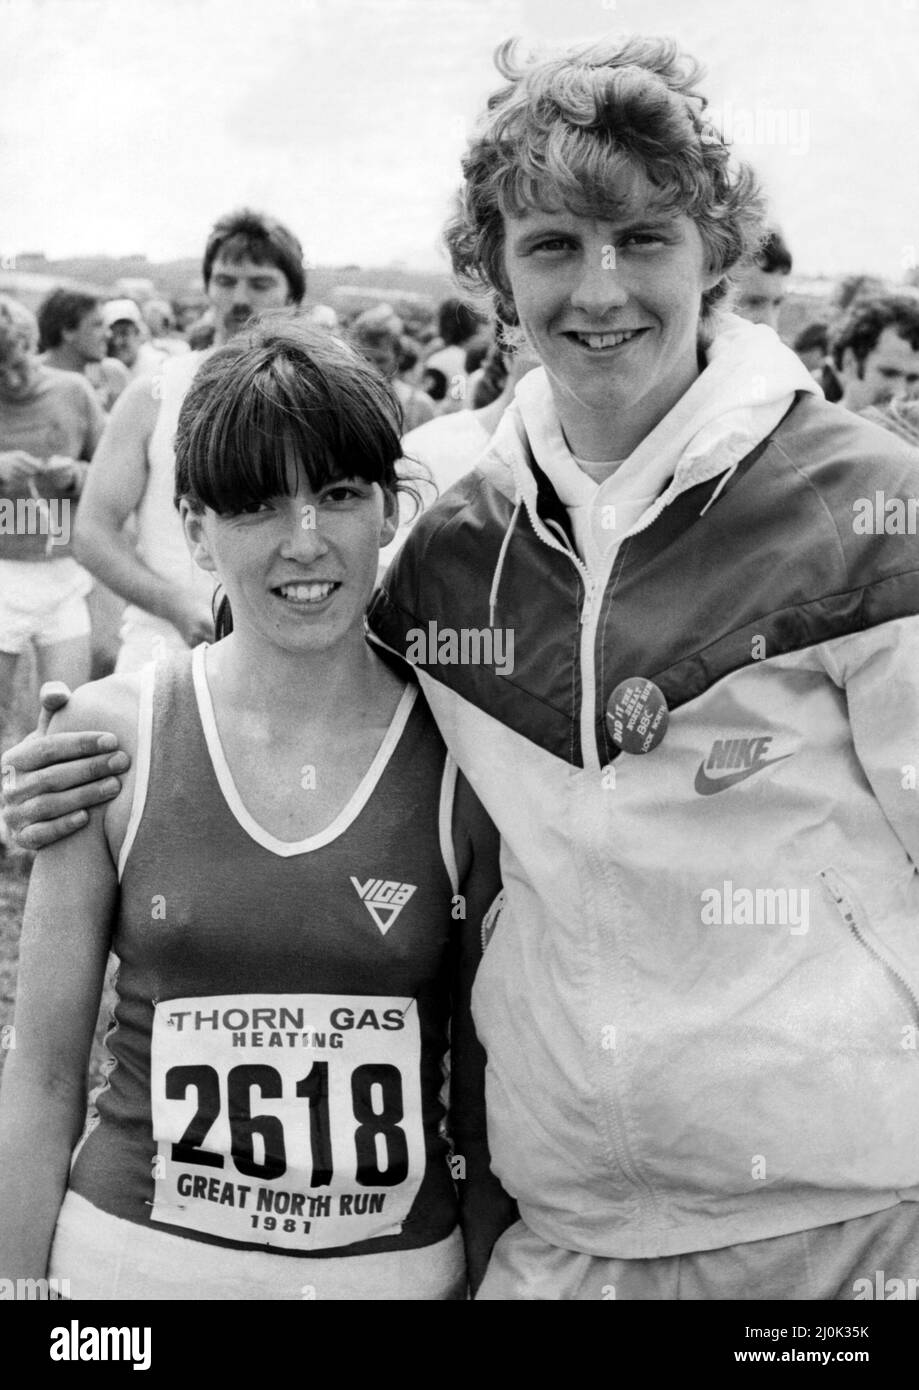 Athlete Steve Cram Steve Cram and fiancee Karen Waters after completing the  Great North Run 28 June 1981 Stock Photo - Alamy